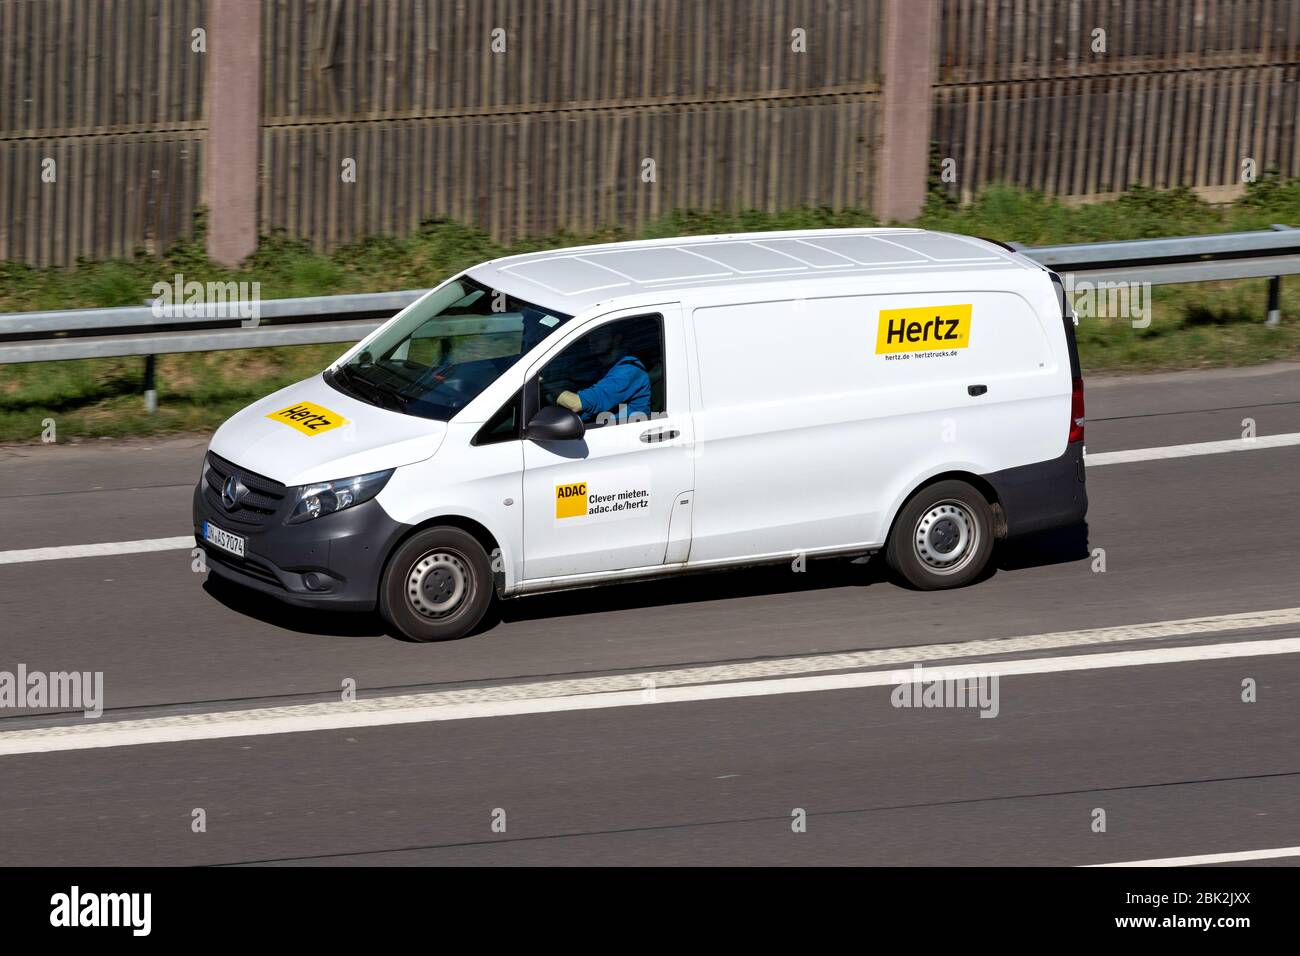 Mercedes-Benz Vito of Hertz on motorway. The Hertz Corporation is an American car rental company based in Estero, Florida. Stock Photo